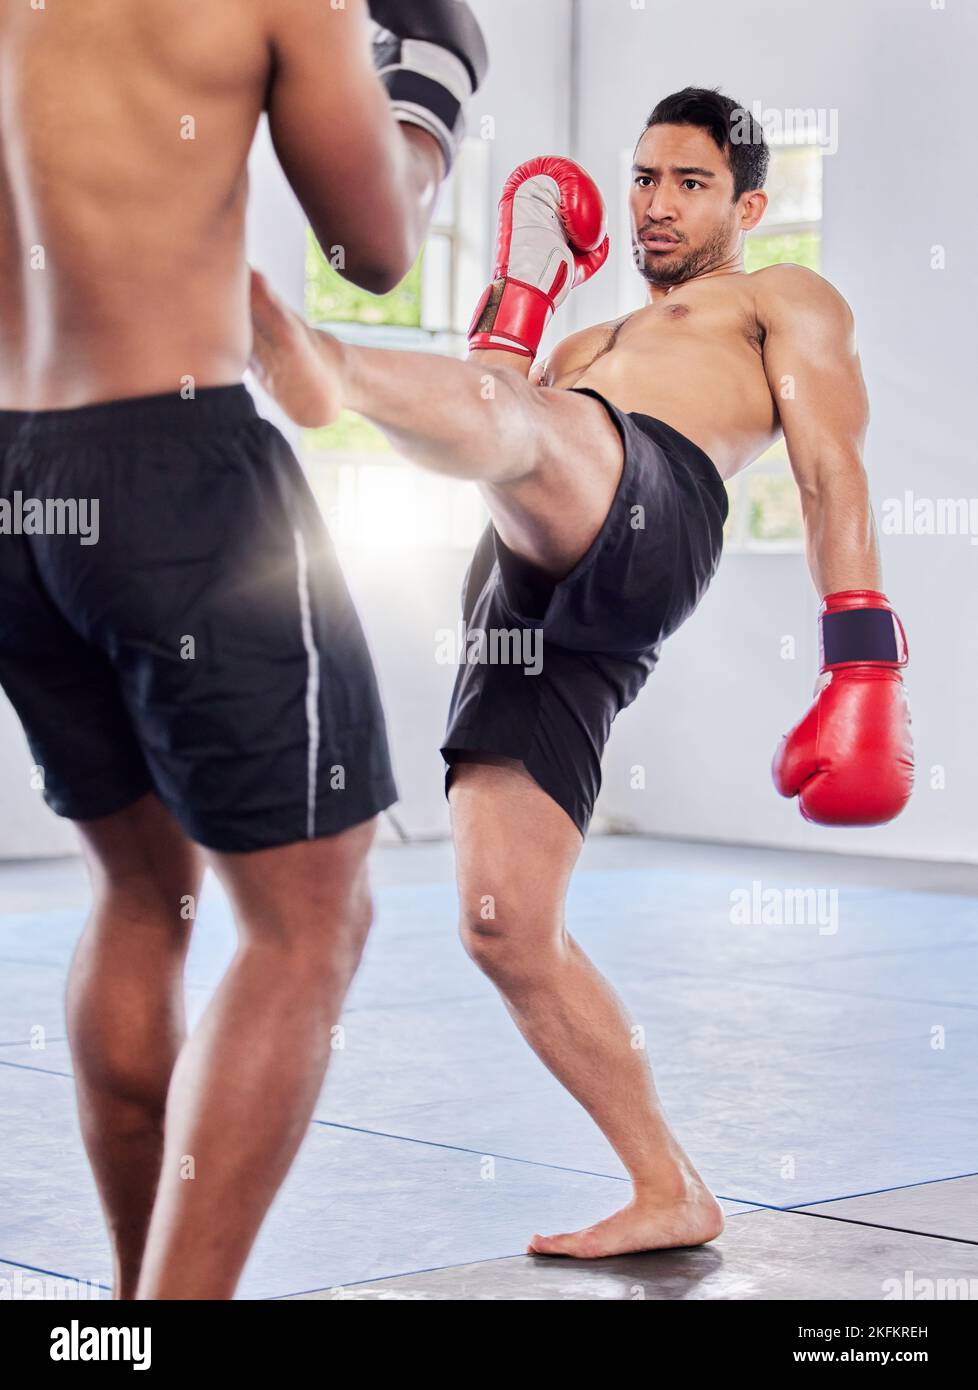 Fitness, kickboxing and mma training, exercise and fight workout in gym with men, gloves and power kick. Fight, athlete or martial arts, coaching or Stock Photo